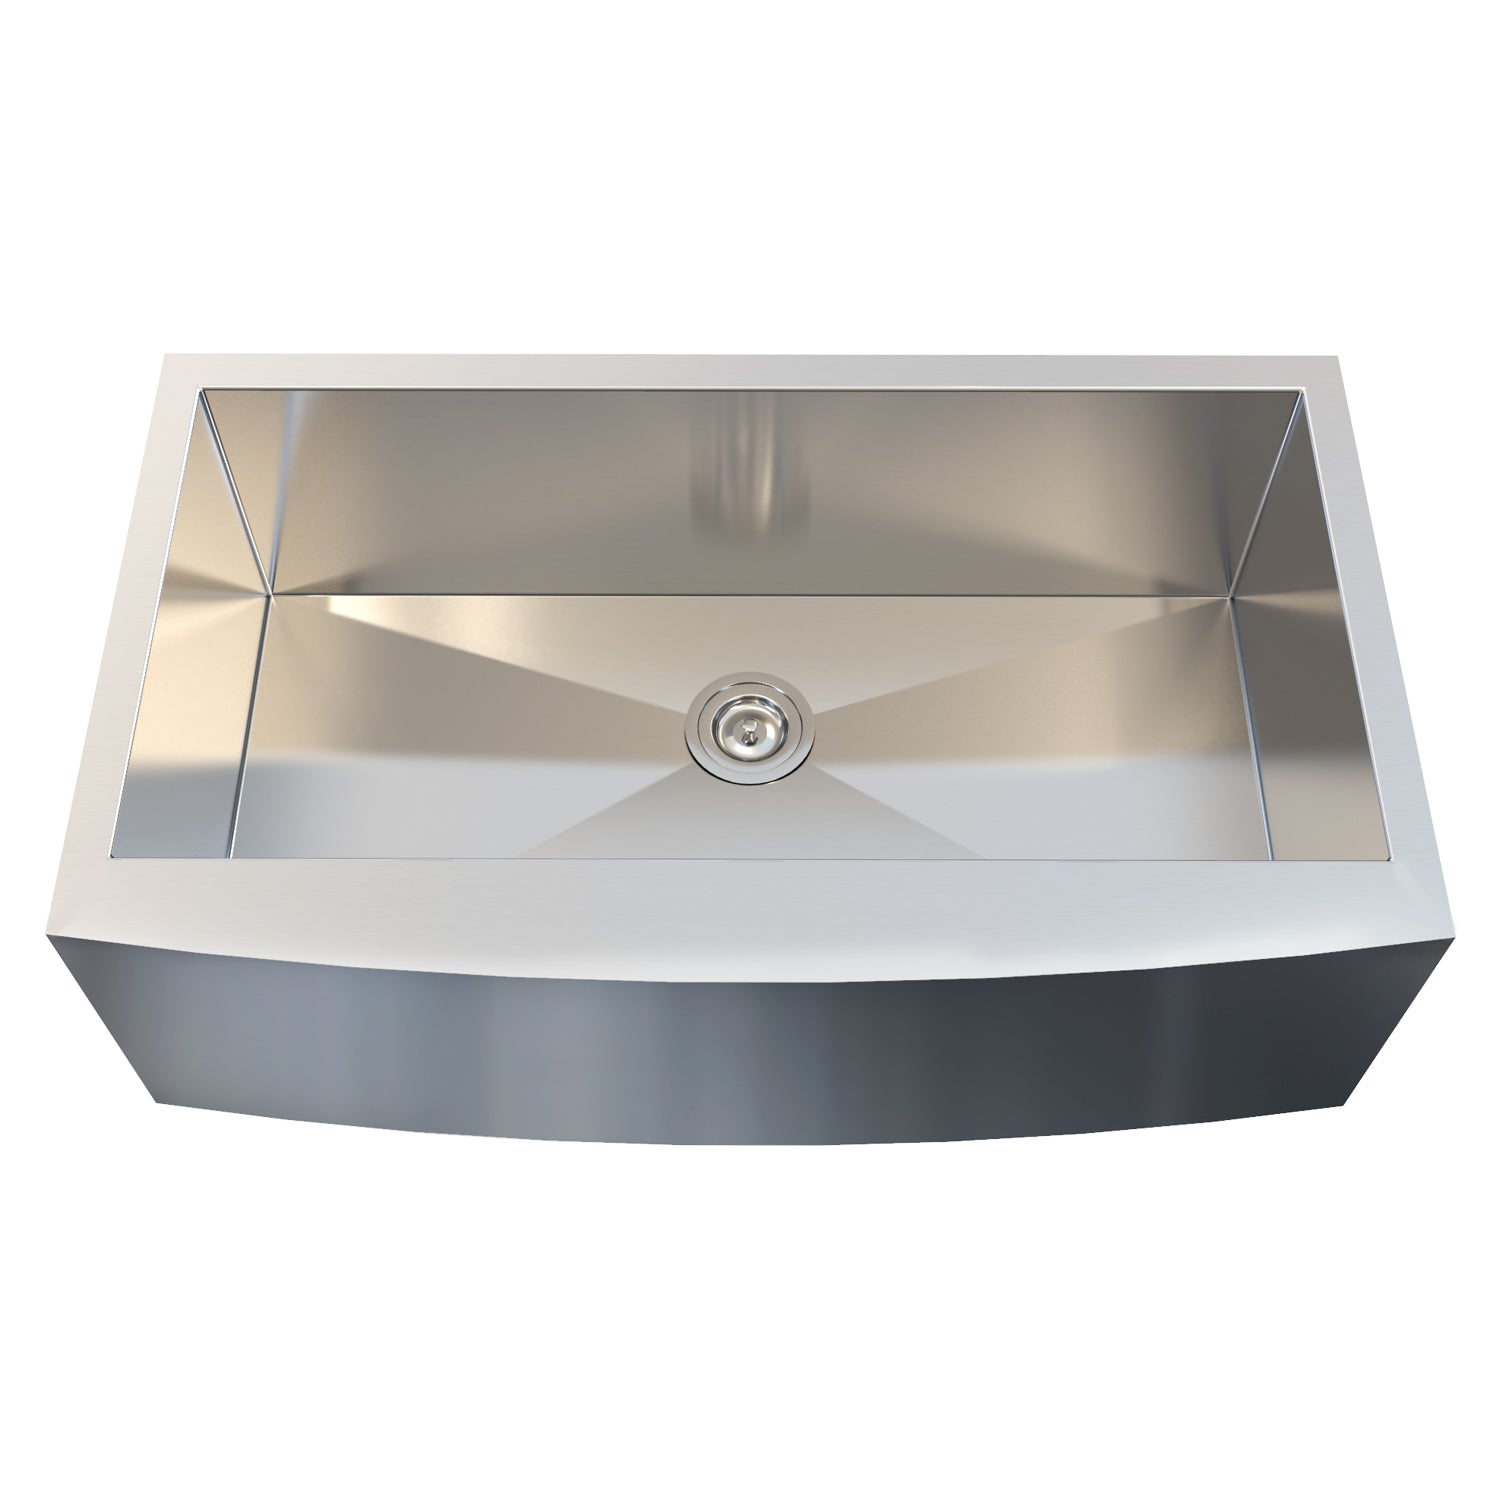 DAX Farmhouse Single Bowl Kitchen Sink, 18 Gauge Stainless Steel, Brushed Finish, 36 x 21 x 10 Inches (KA-3621R10)